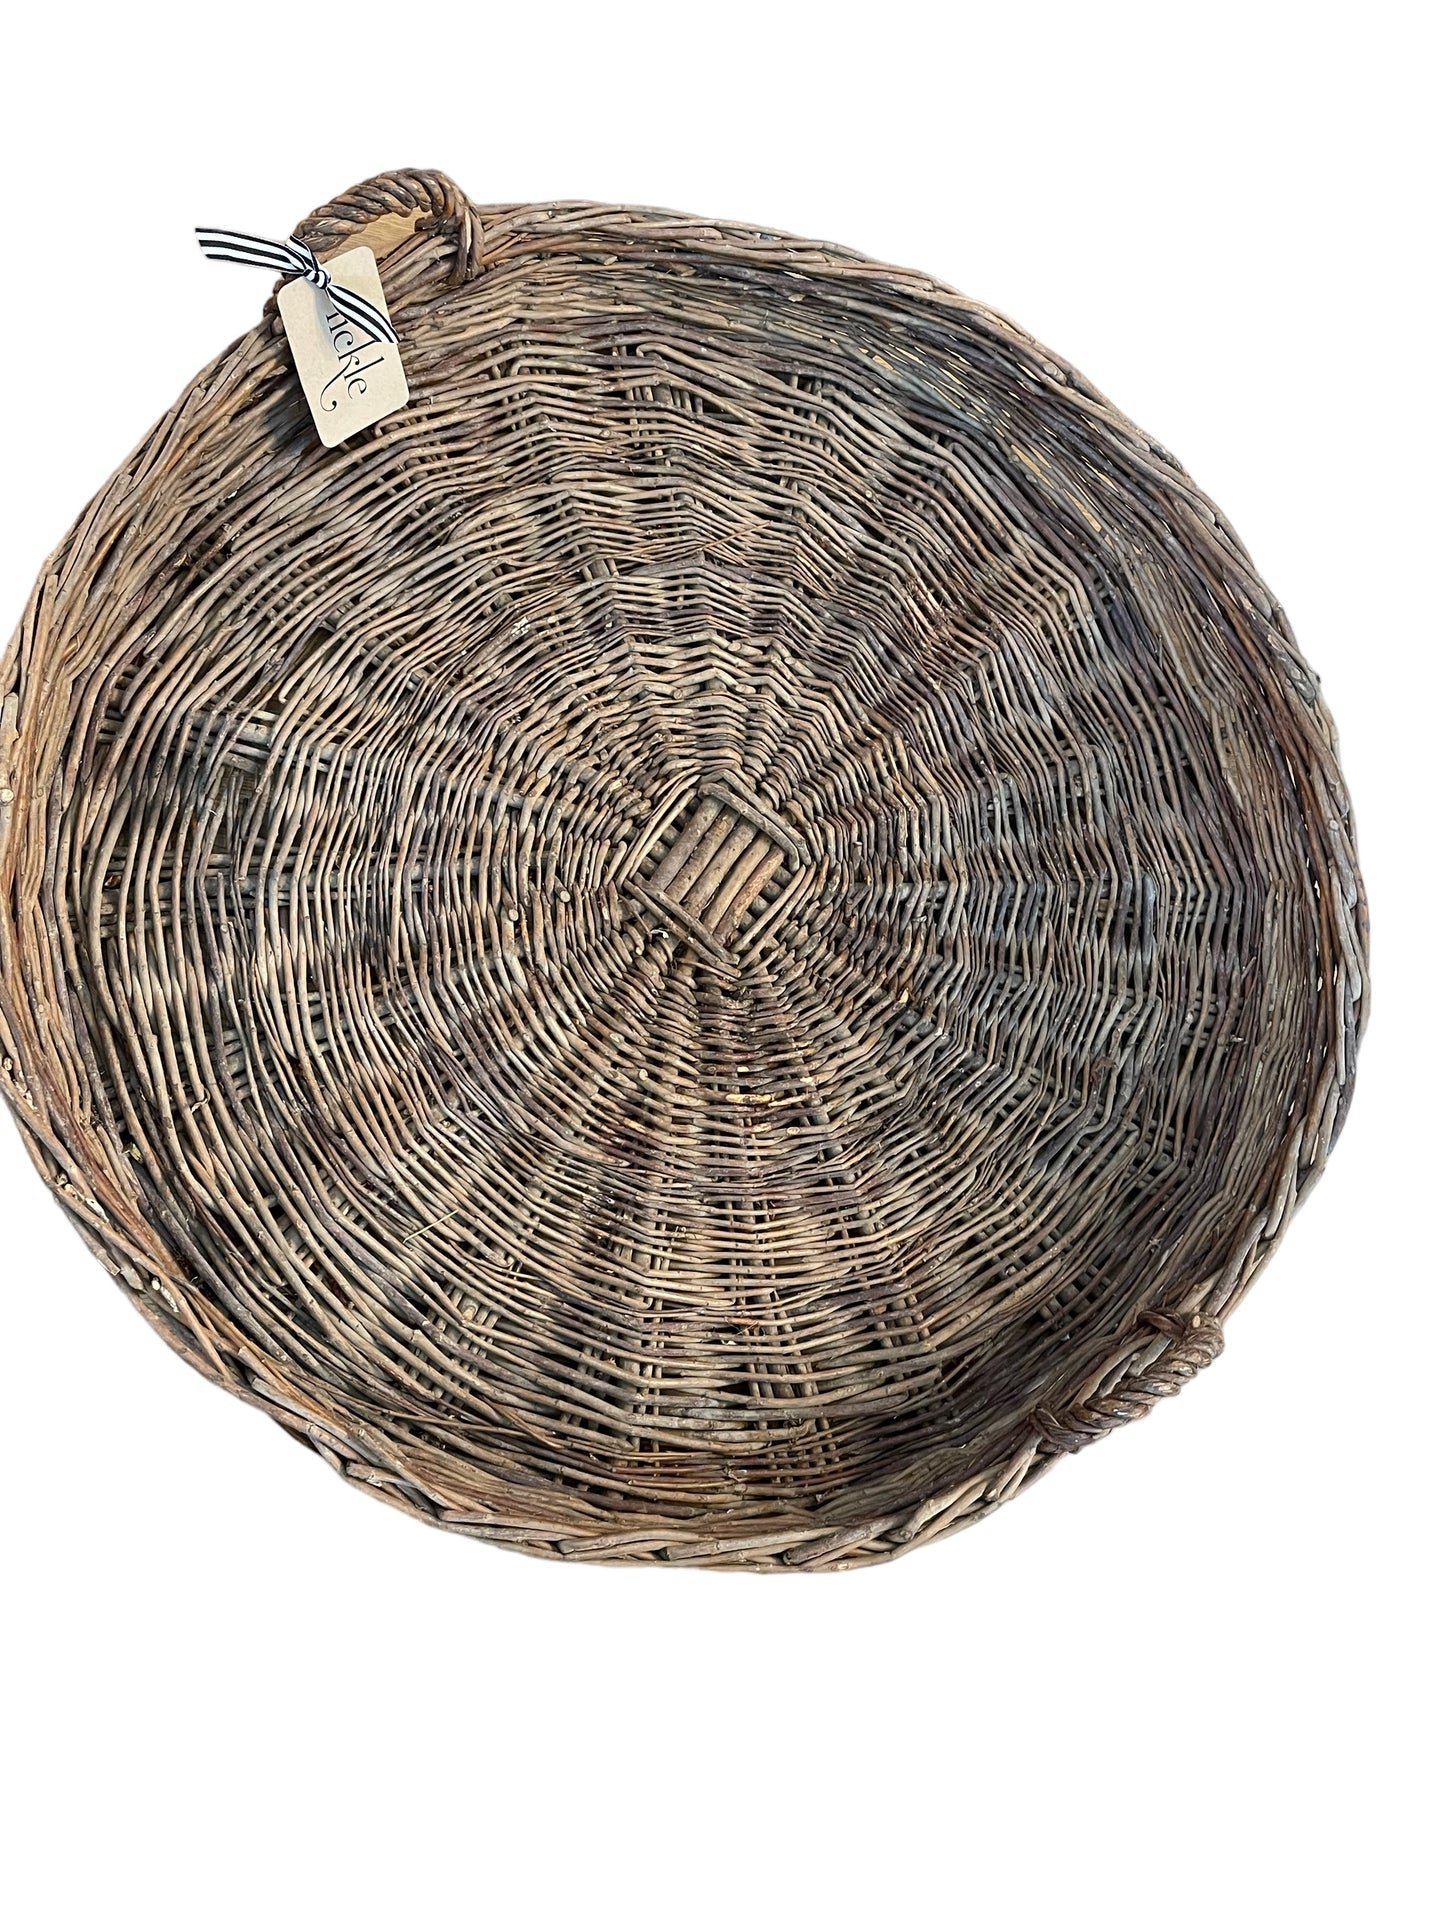 Rare Willow Winnowing Baskets from early 1900s